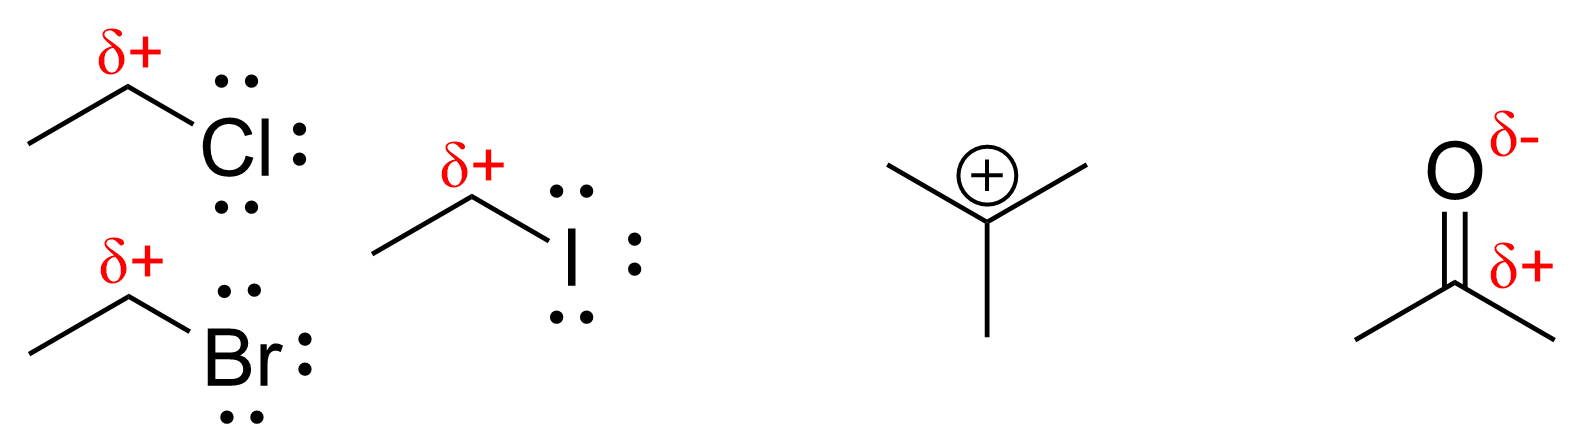 3 molecules in Line-bond format. 2 lines connected in a zig-zag format, like the top of a triangle without the bottom side. On the right end of each these molecules are Cl, Br, and I respectively with 3 lone pairs on each, and delta plus symbol on the carbon bound to the halogen. In the center of the figure is a tertiary butyl carbocation, being 3 lines connected like a Y-shape, containing a plus symbol (positive charge) in the middle of the prongs. Lastly, on the right is another zigzag of 2 lines where at the peak, there are two parallel vertical lines sticking up with an O right above with delta plus at the bottom of the double bond and a delta minus at the O.